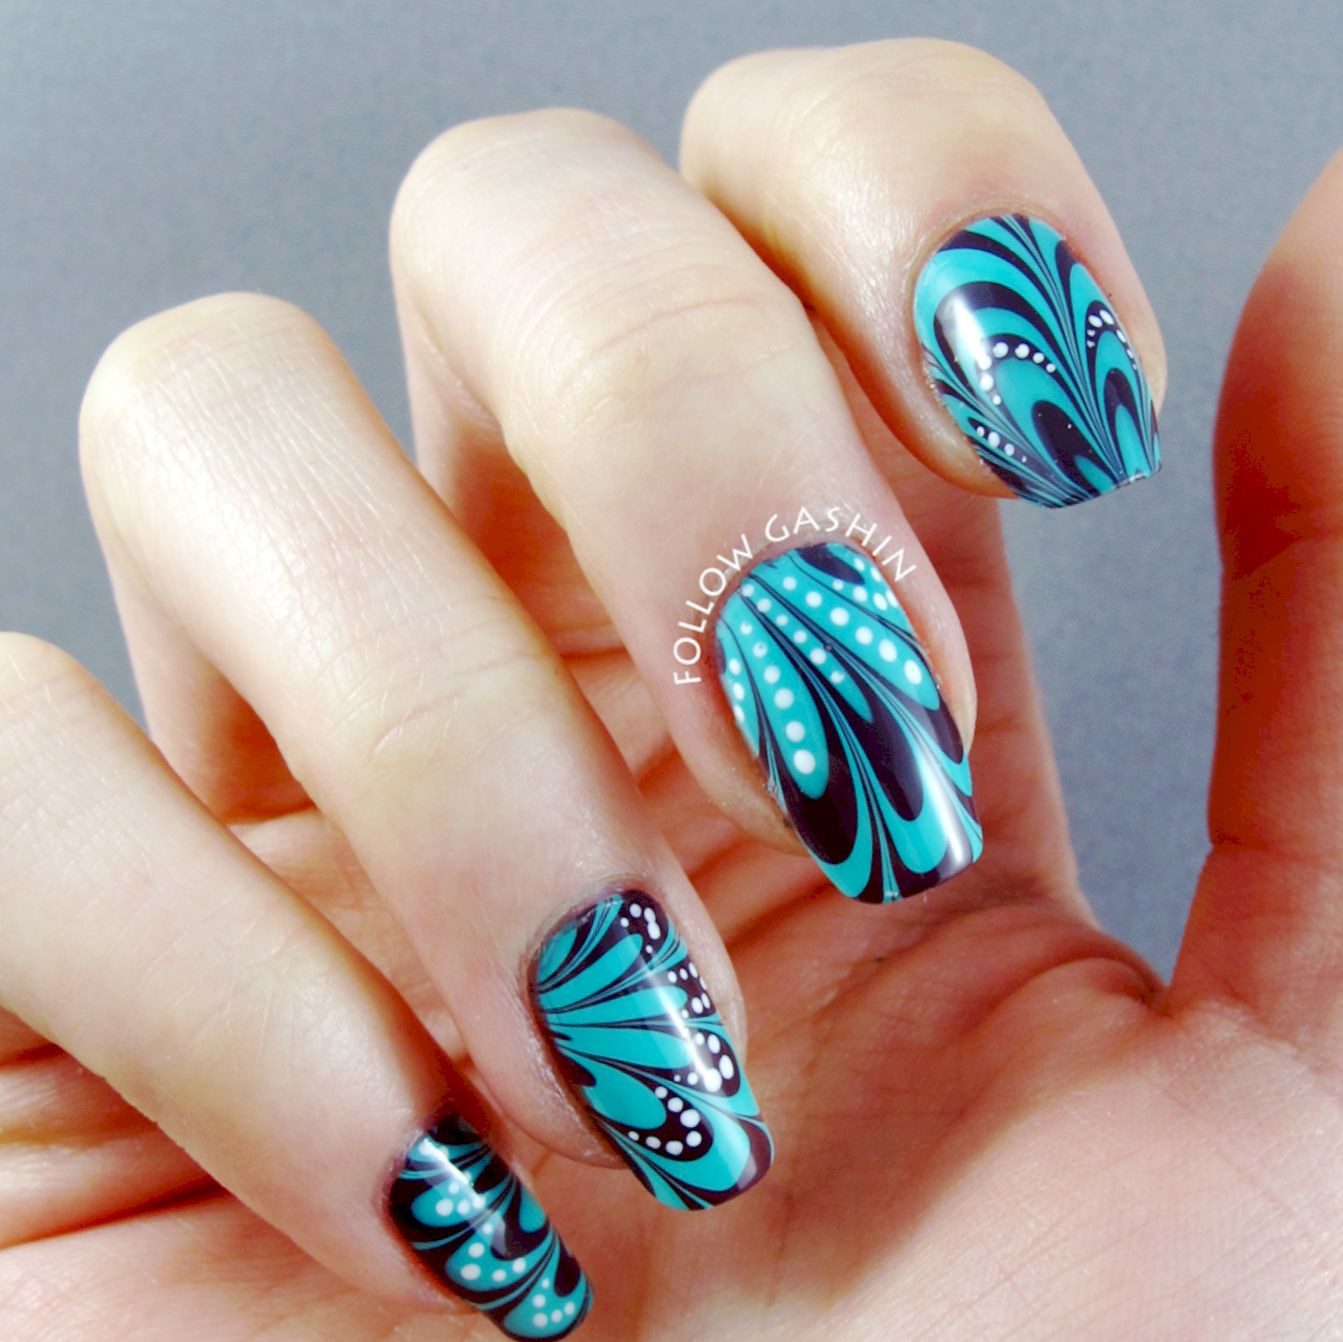 Swirl Nail Art Without Water
 Marble Nail Designs Without Water Amazing Nails design